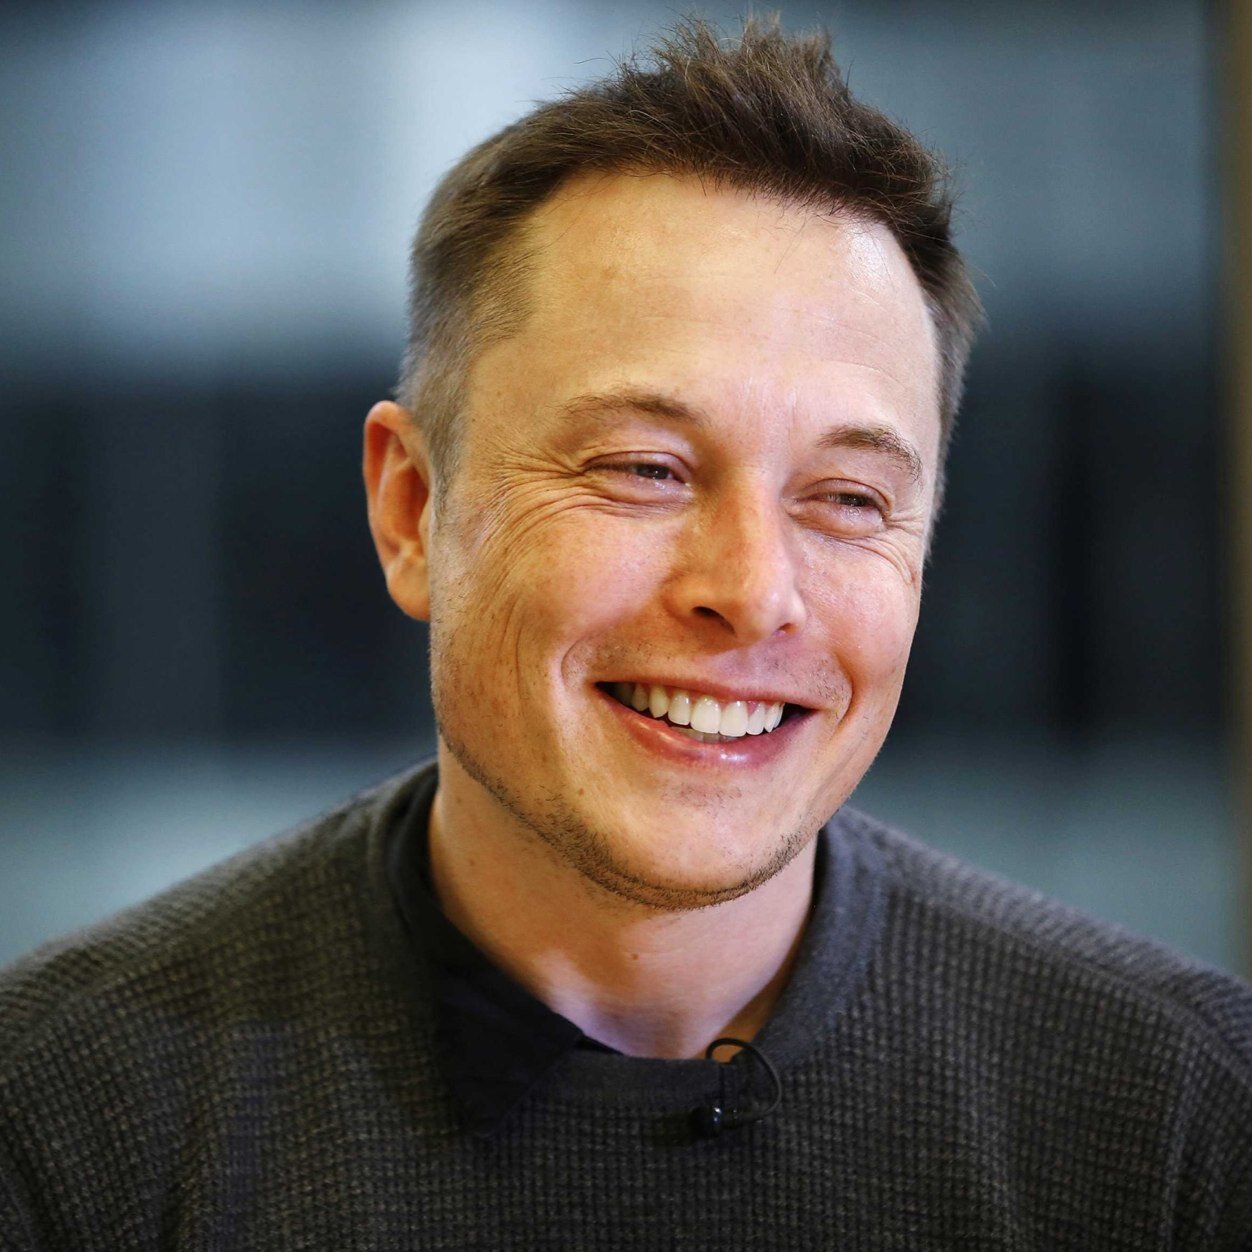 Elon Musk Built A Device To Execute The ALS Ice Bucket Challenge That Required A Tree, Ropes, And His Five Sons